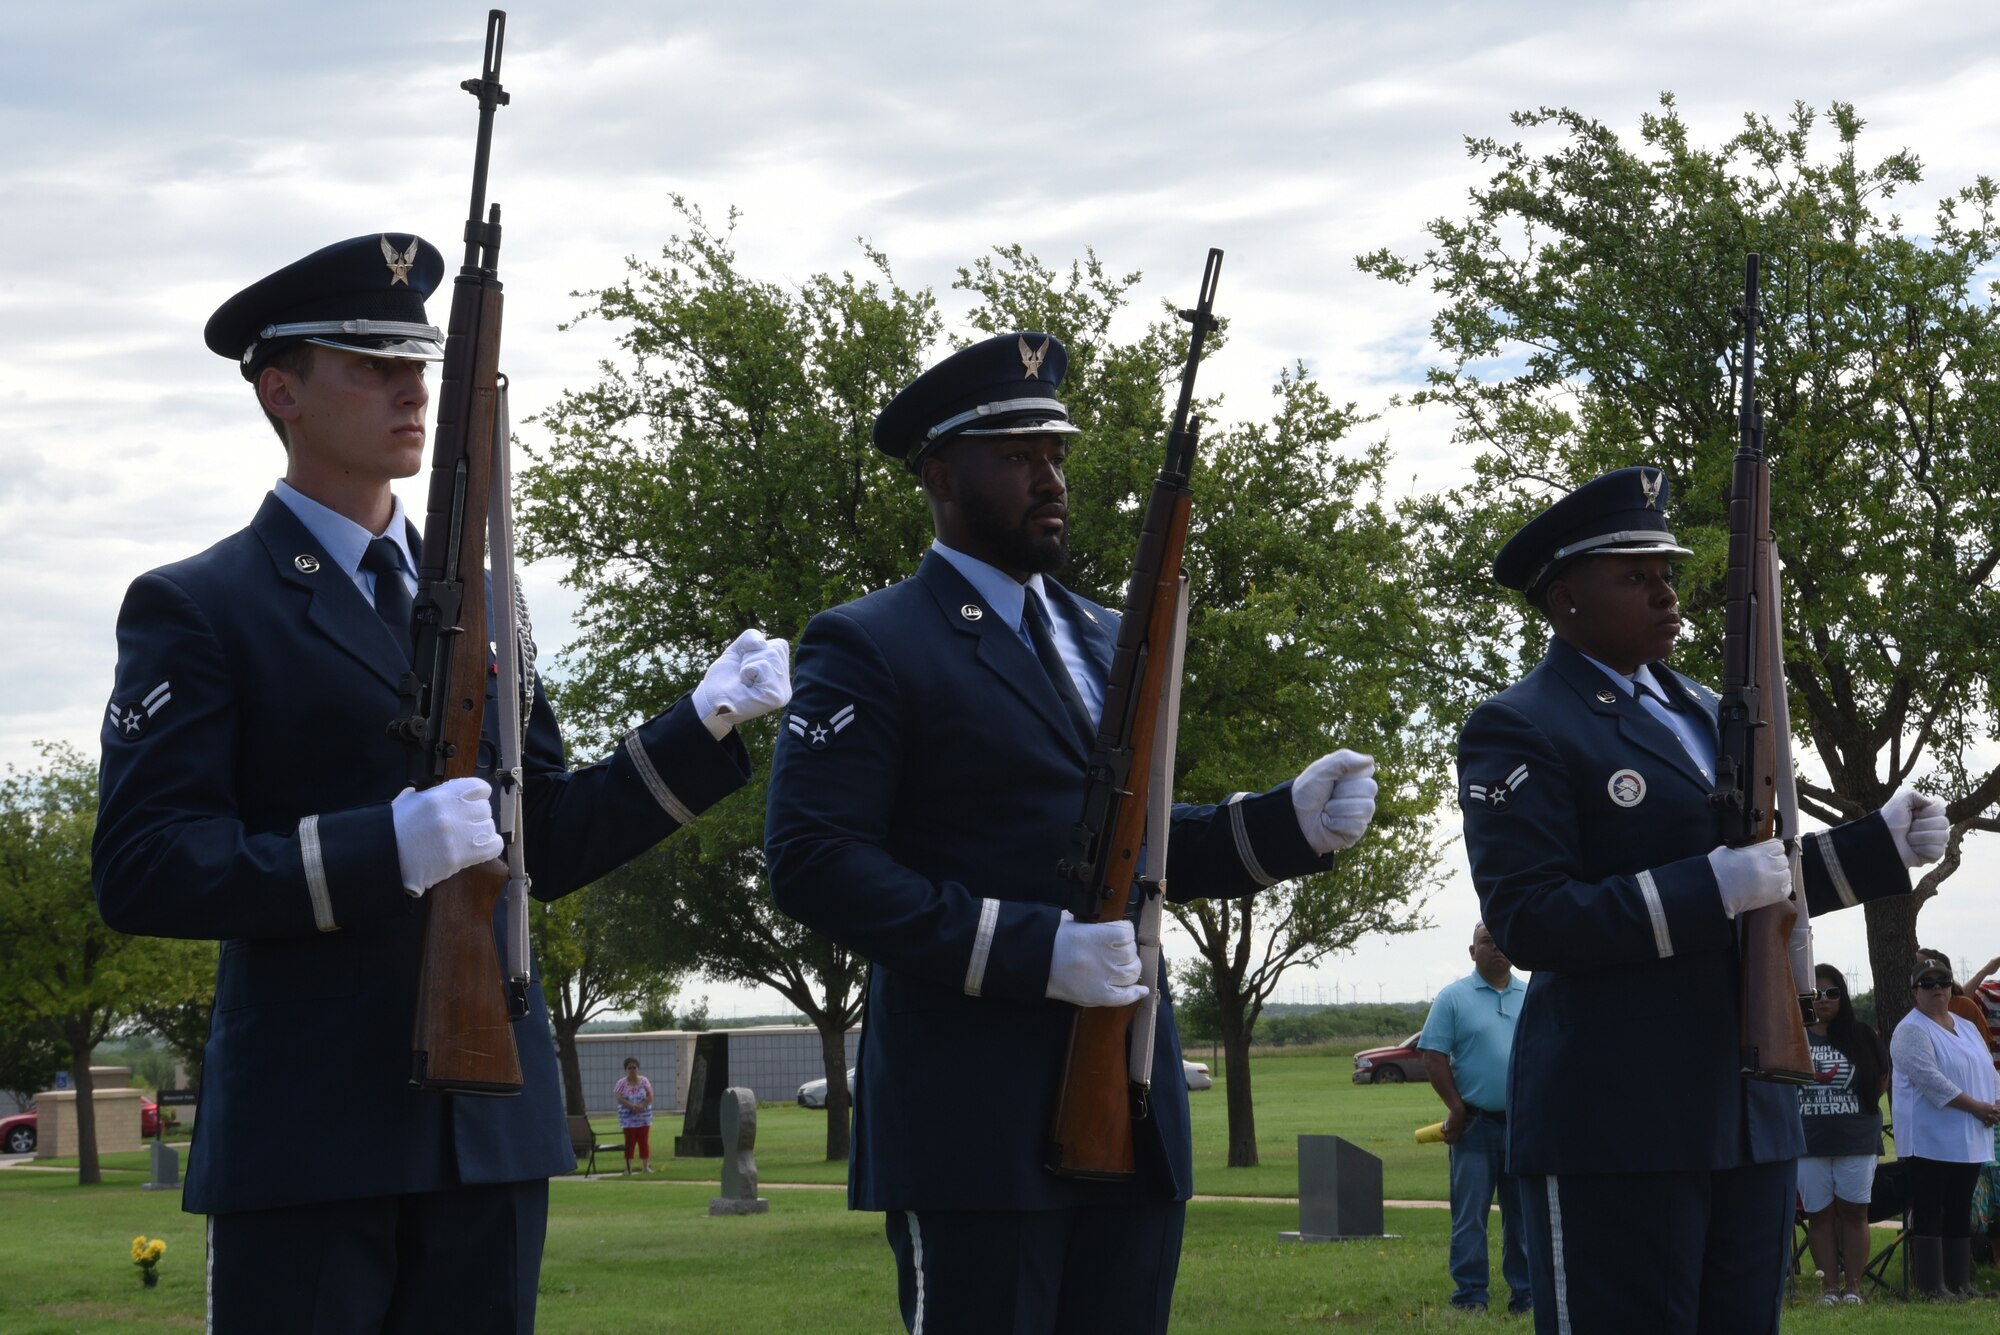 Dyess Honor Guard members perform the firing of volleys during the Memorial Day Ceremony at the Texas State Veterans Cemetery in Abilene, Texas, May 29, 2023. Memorial Day is a time to honor the ultimate sacrifice of the service members that gave their lives in defense of the United States. (U.S. Air Force photo by Senior Airman Sophia Robello)